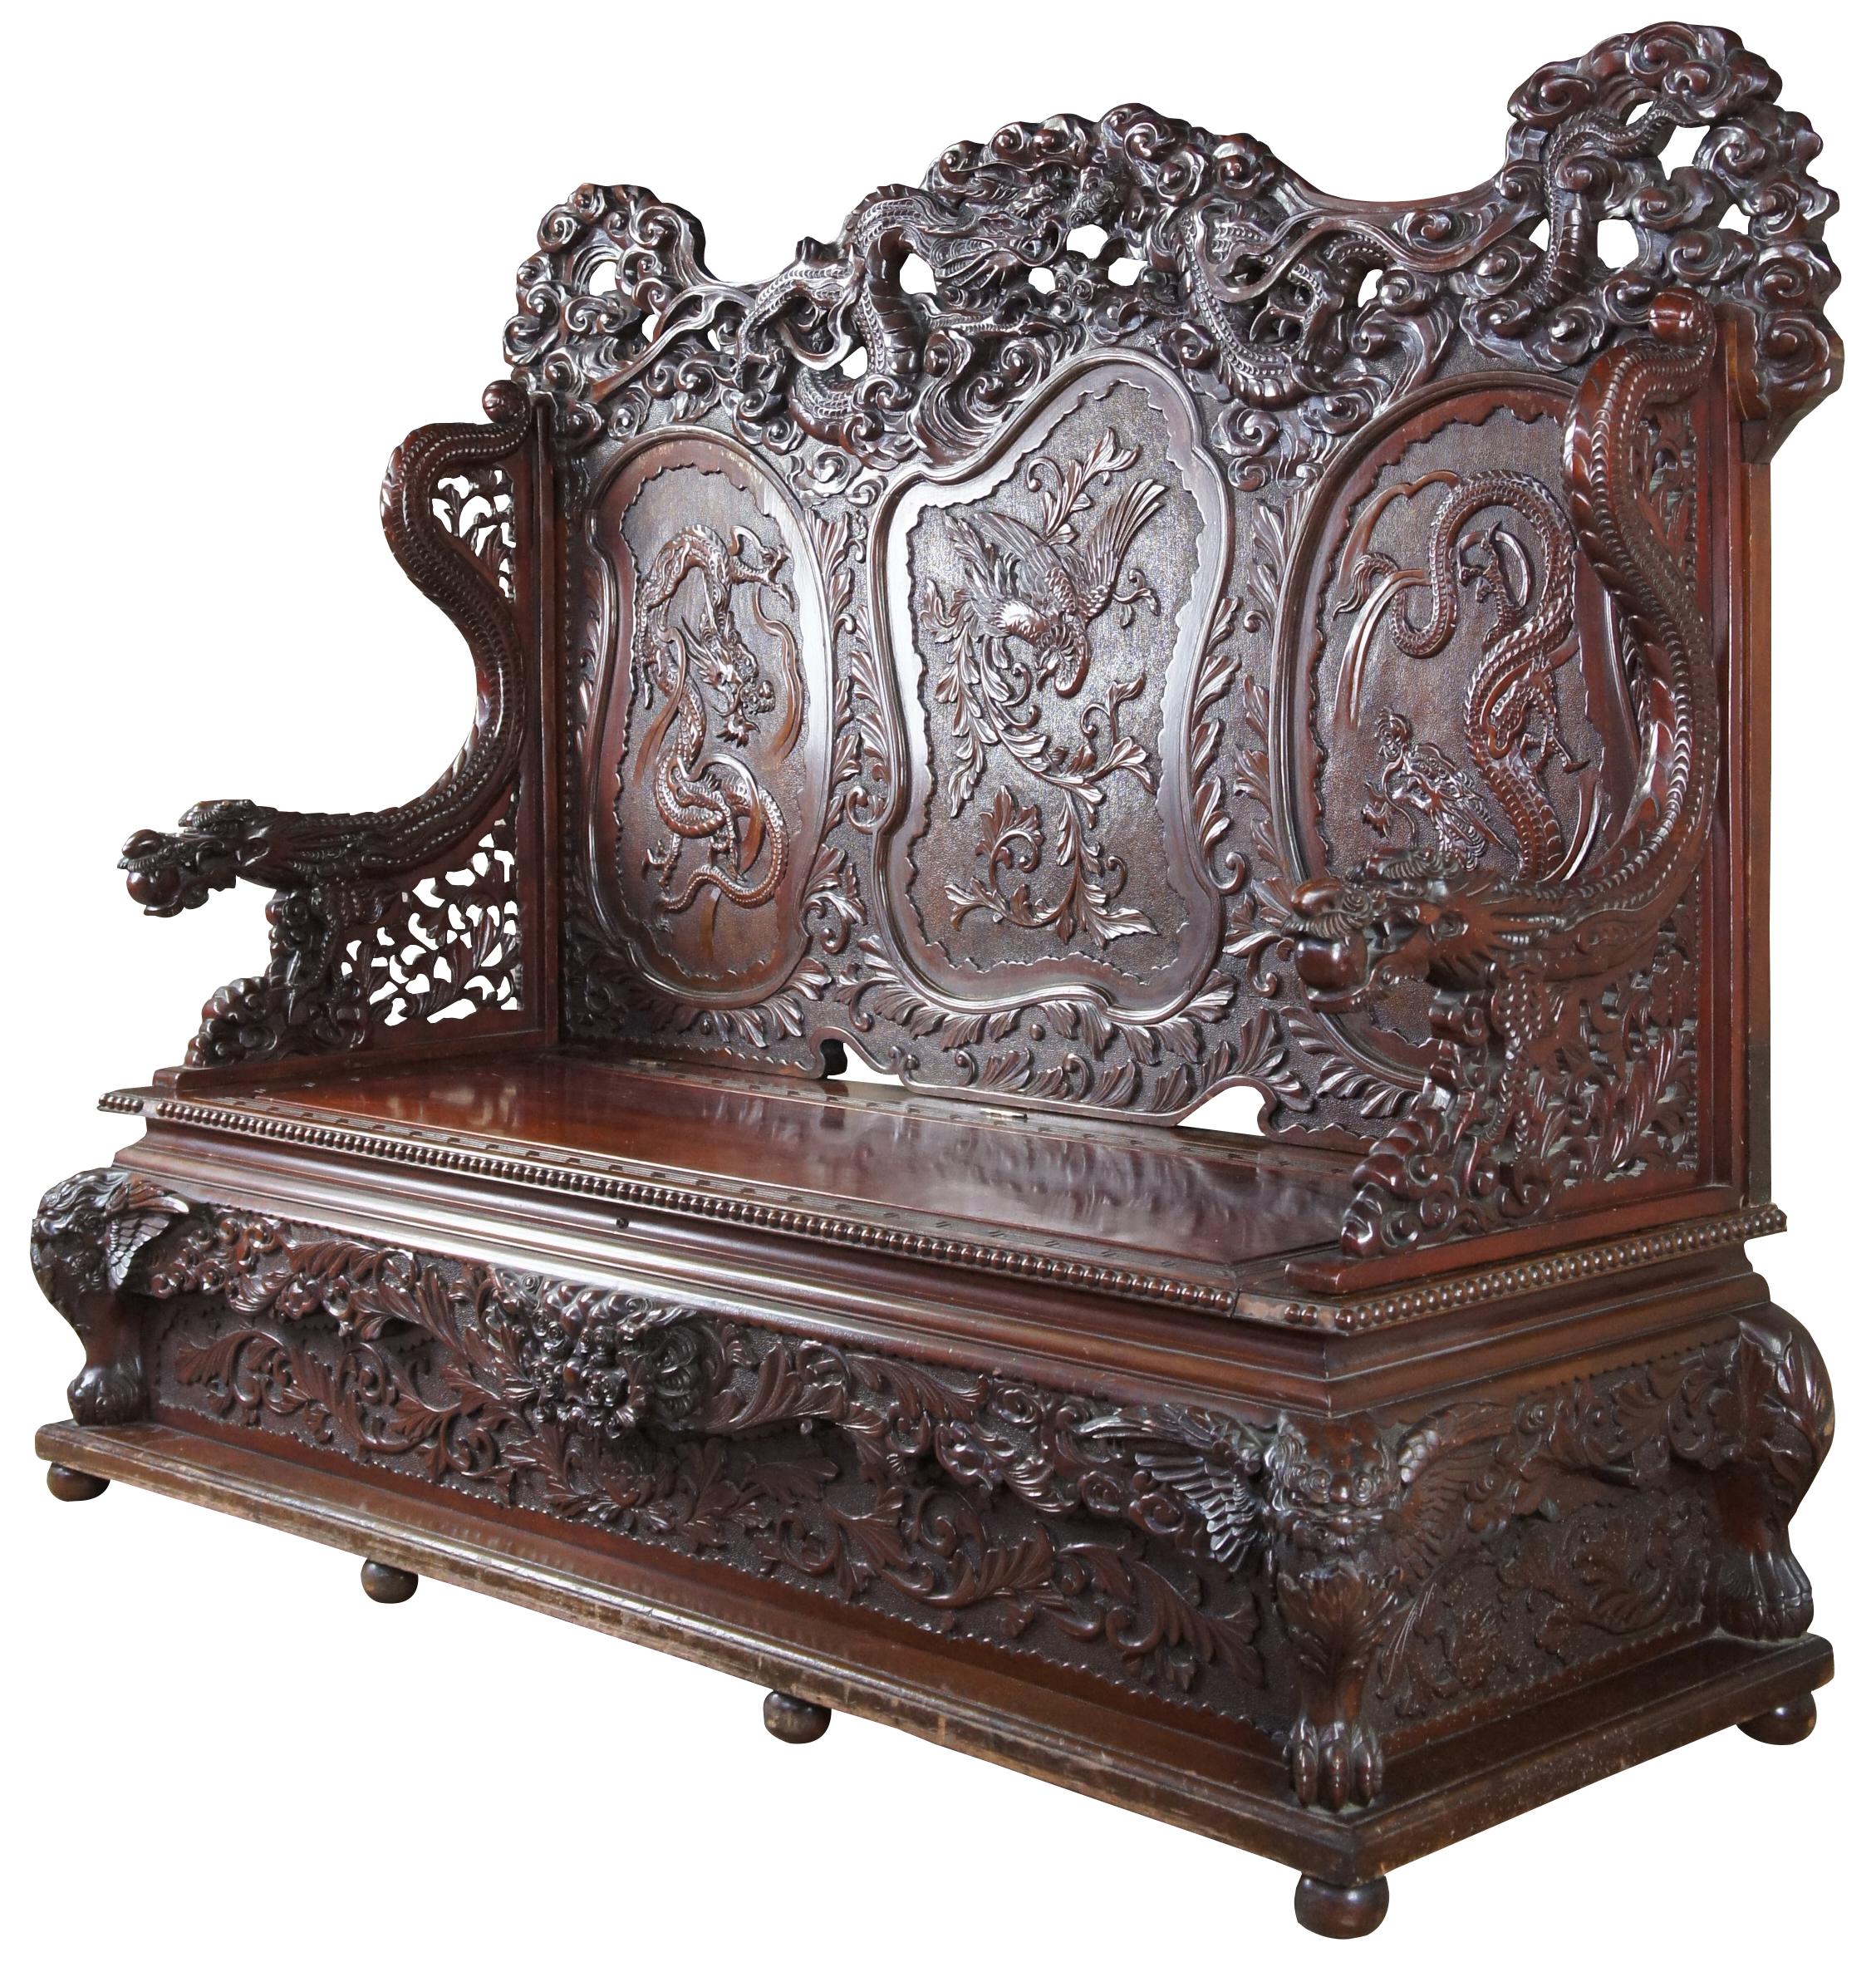 Imperial Japanese Meiji Period dragon bench. Features high relief carved accents and under seat storage. From top to bottom this piece is ordained with three toed dragons. The crown is pierced with a serpentine dragon sprawling through a field of